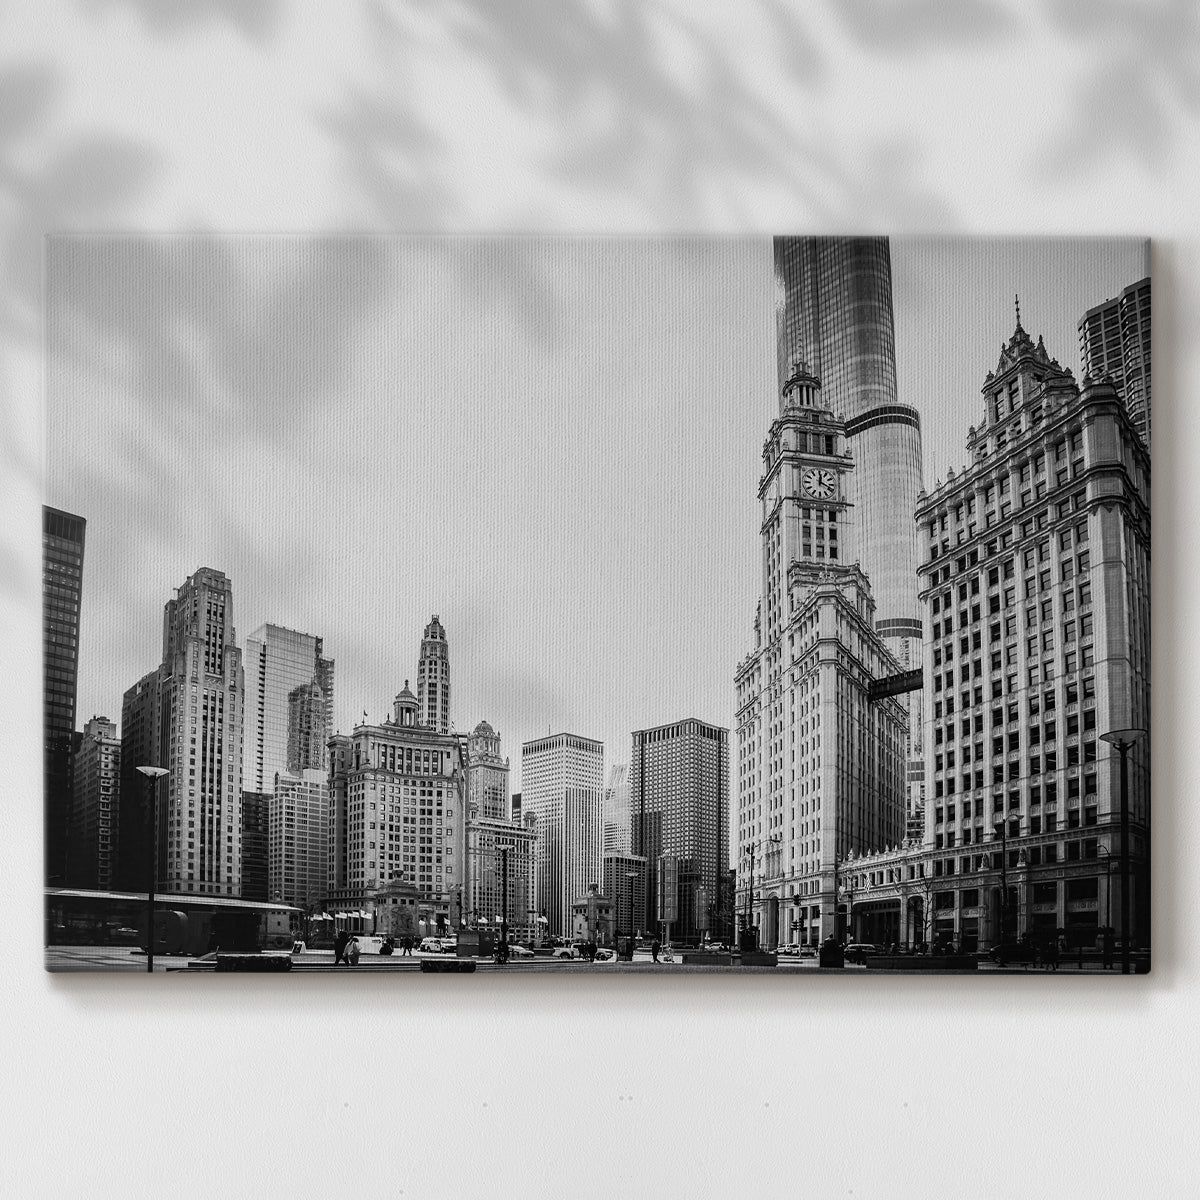 Black and White Chicago - Gallery Wrapped Canvas